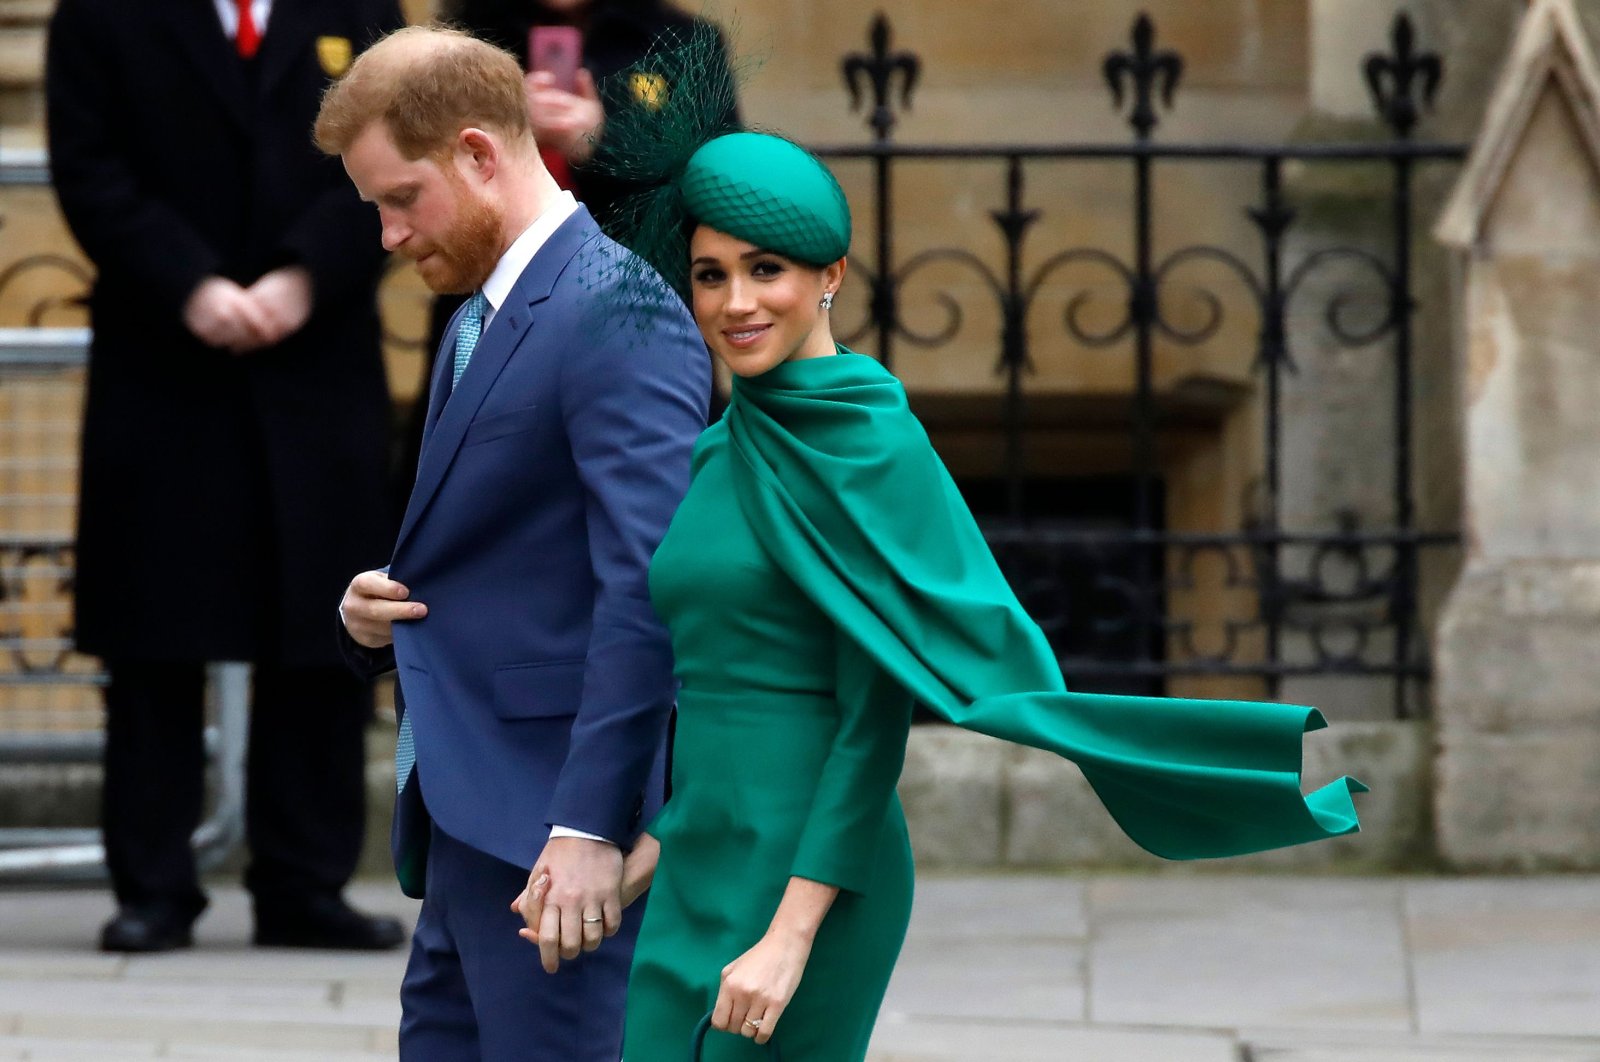 Britain's Prince Harry, Duke of Sussex, (L) and Meghan, Duchess of Sussex arrive to attend the annual Commonwealth Service at Westminster Abbey in London, March 9, 2020. (AFP Photo)